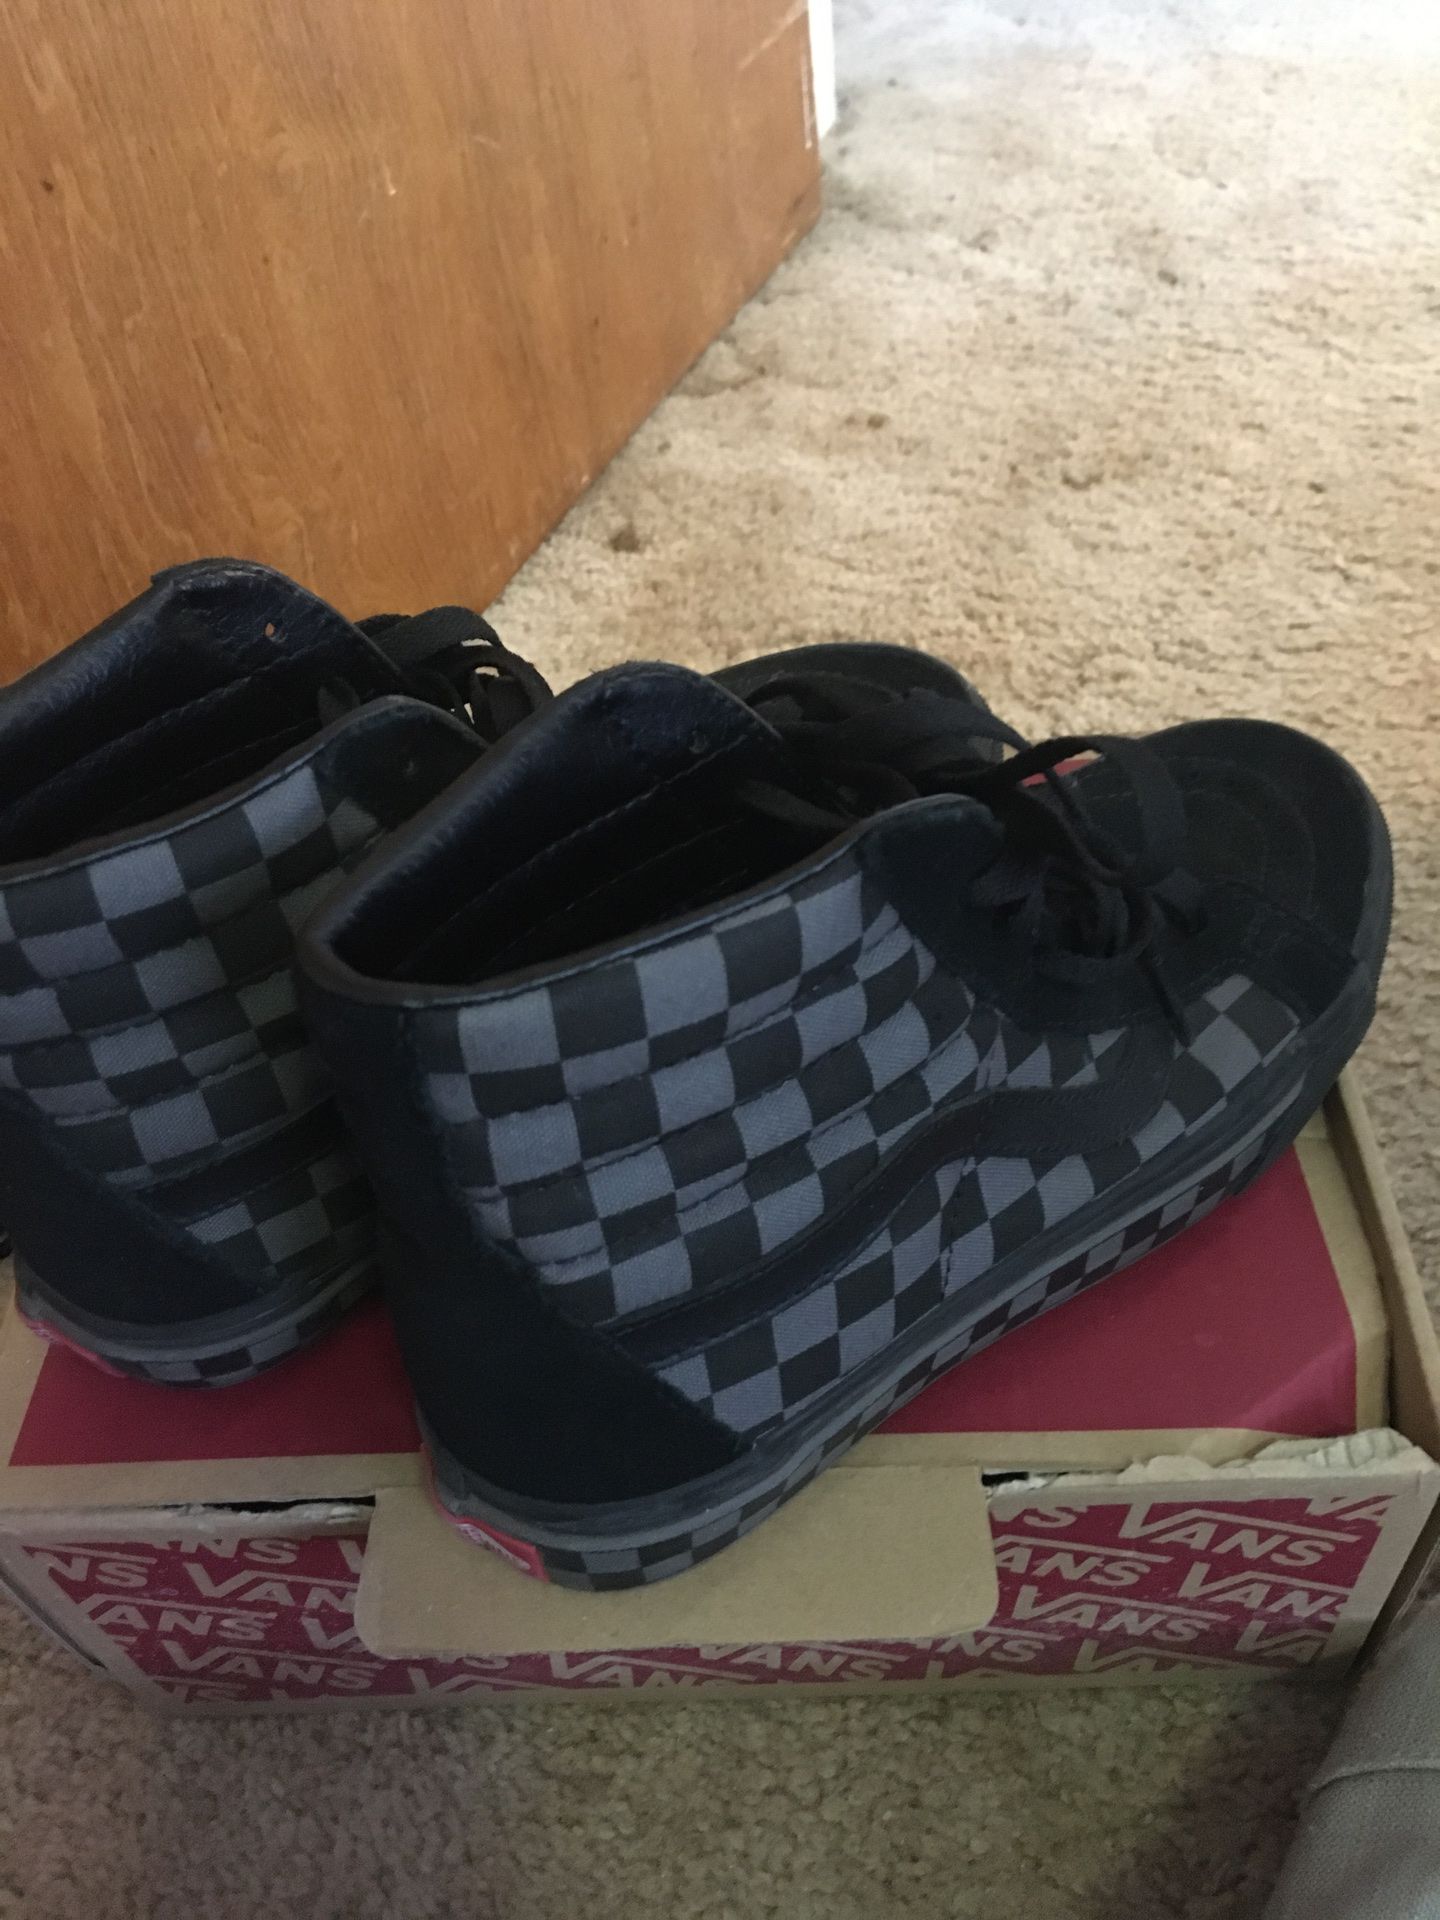 Vans shoes very nice size 5